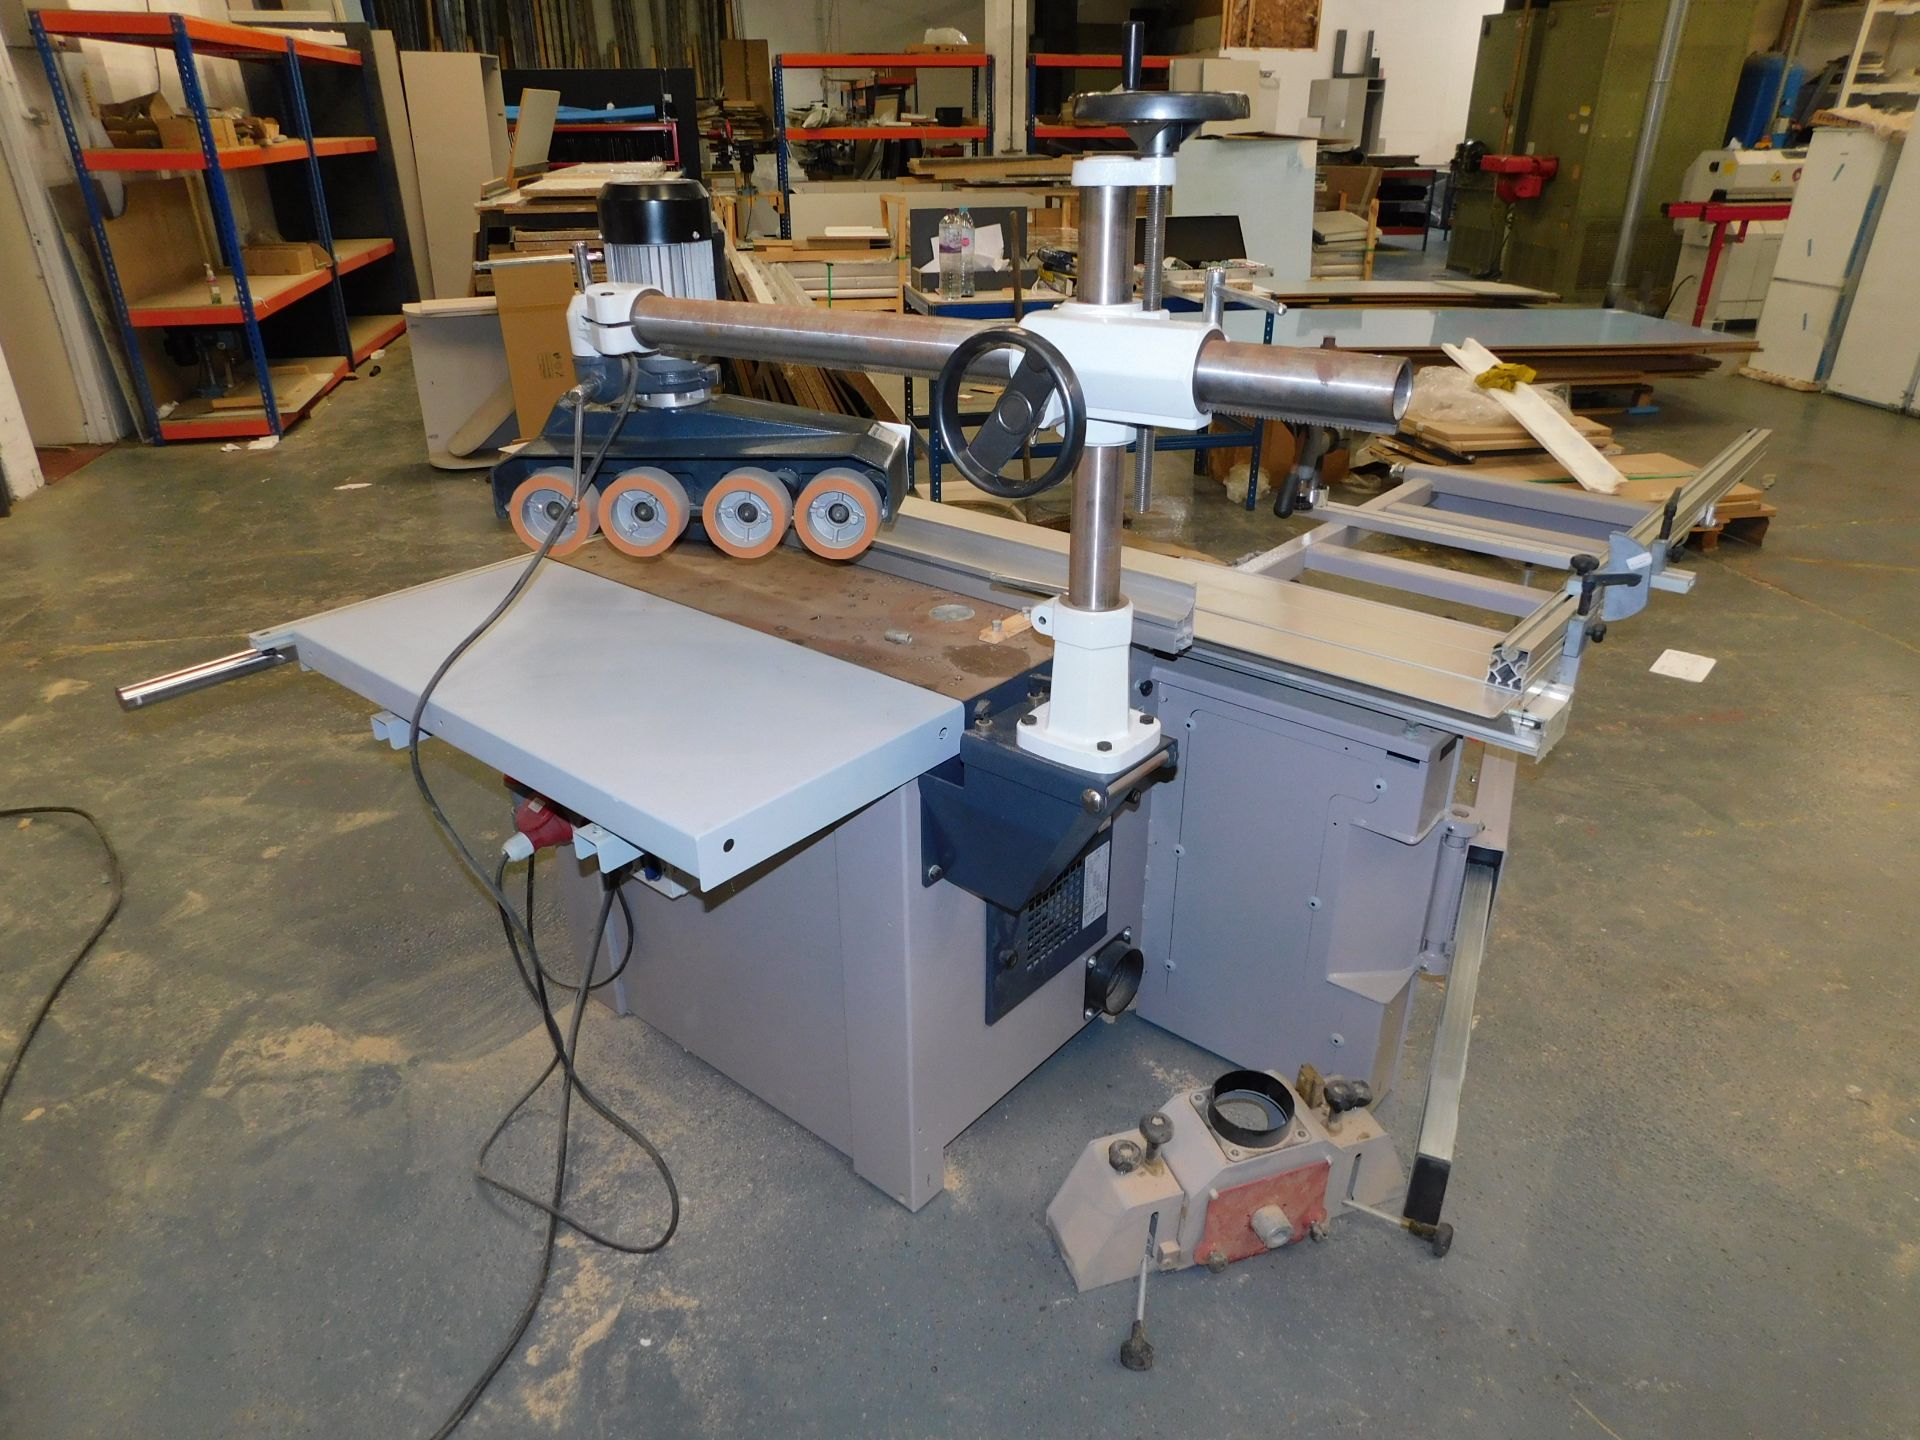 2018 Hammer B3 Perform Combination Sliding Table Saw/Moulder, Serial Number: 51.06.111.18 with - Image 3 of 9